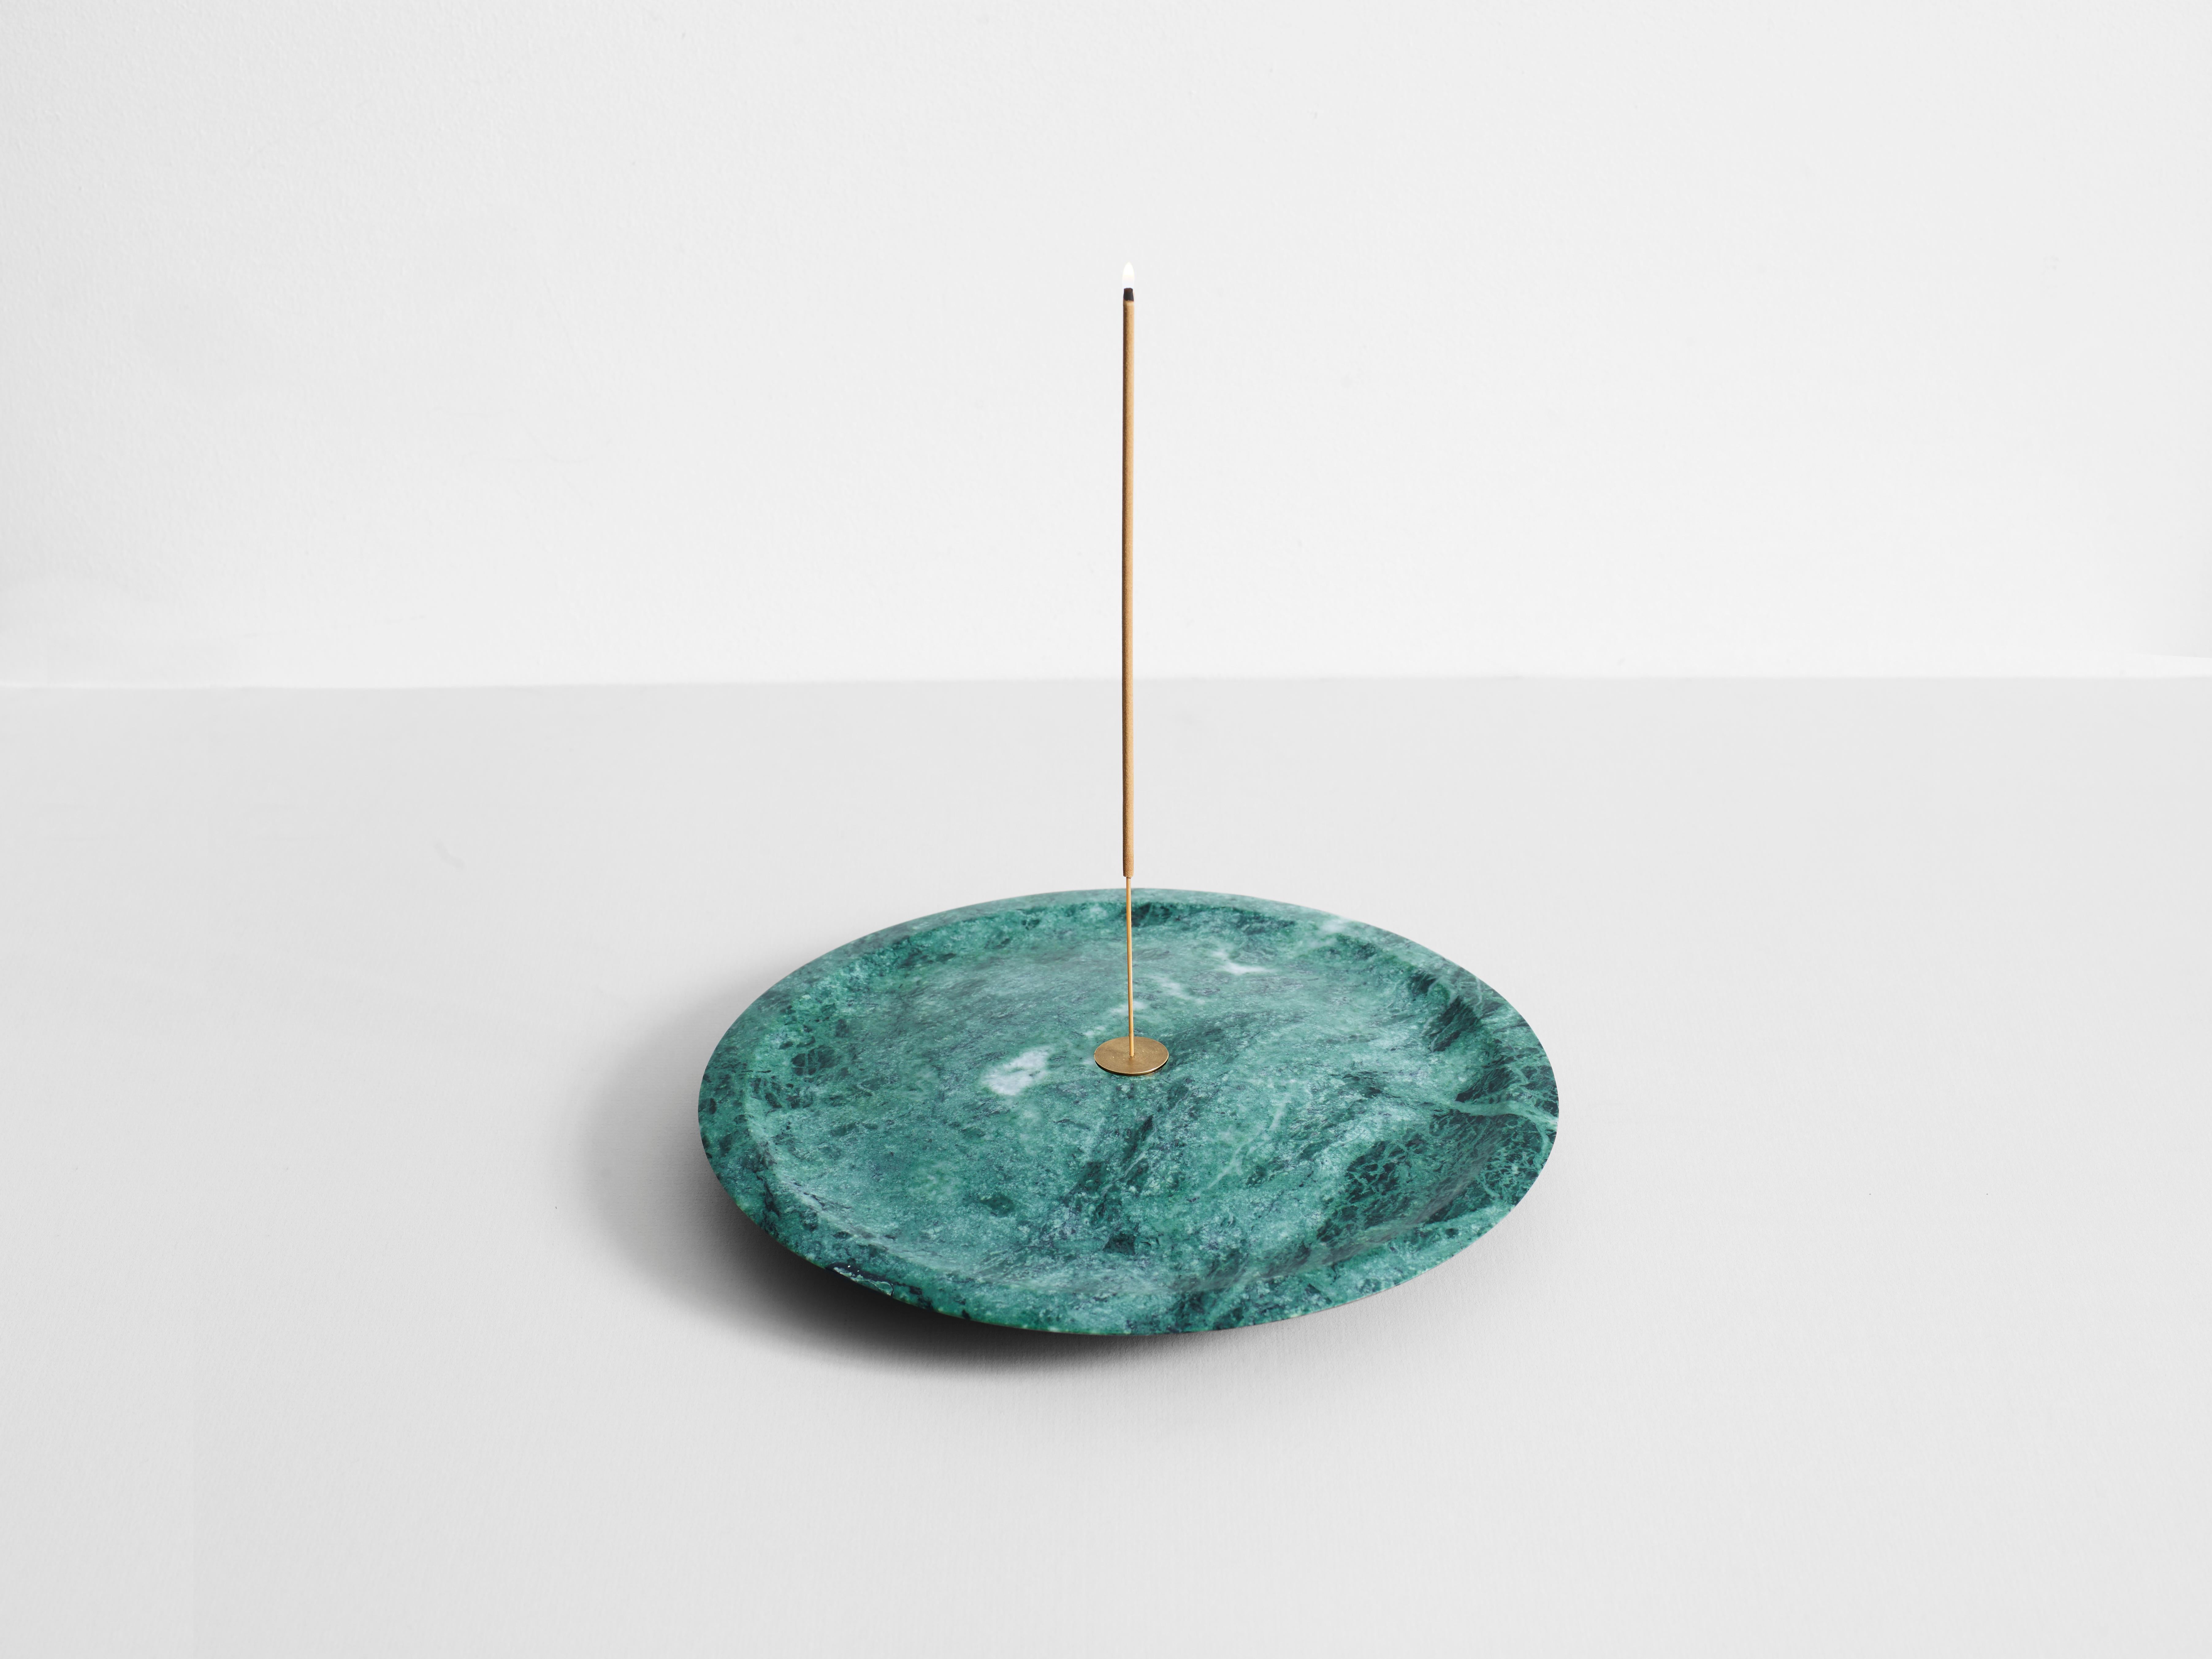 Green Guatemala Incense Plate by Henry Wilson
Dimensions: D 28 x H 4 cm
Materials: Green Guatemala Marble

The Incense plate is carved from solid Green Guatemala marble and uses a central brass insert to hold incense sticks. The insert is double